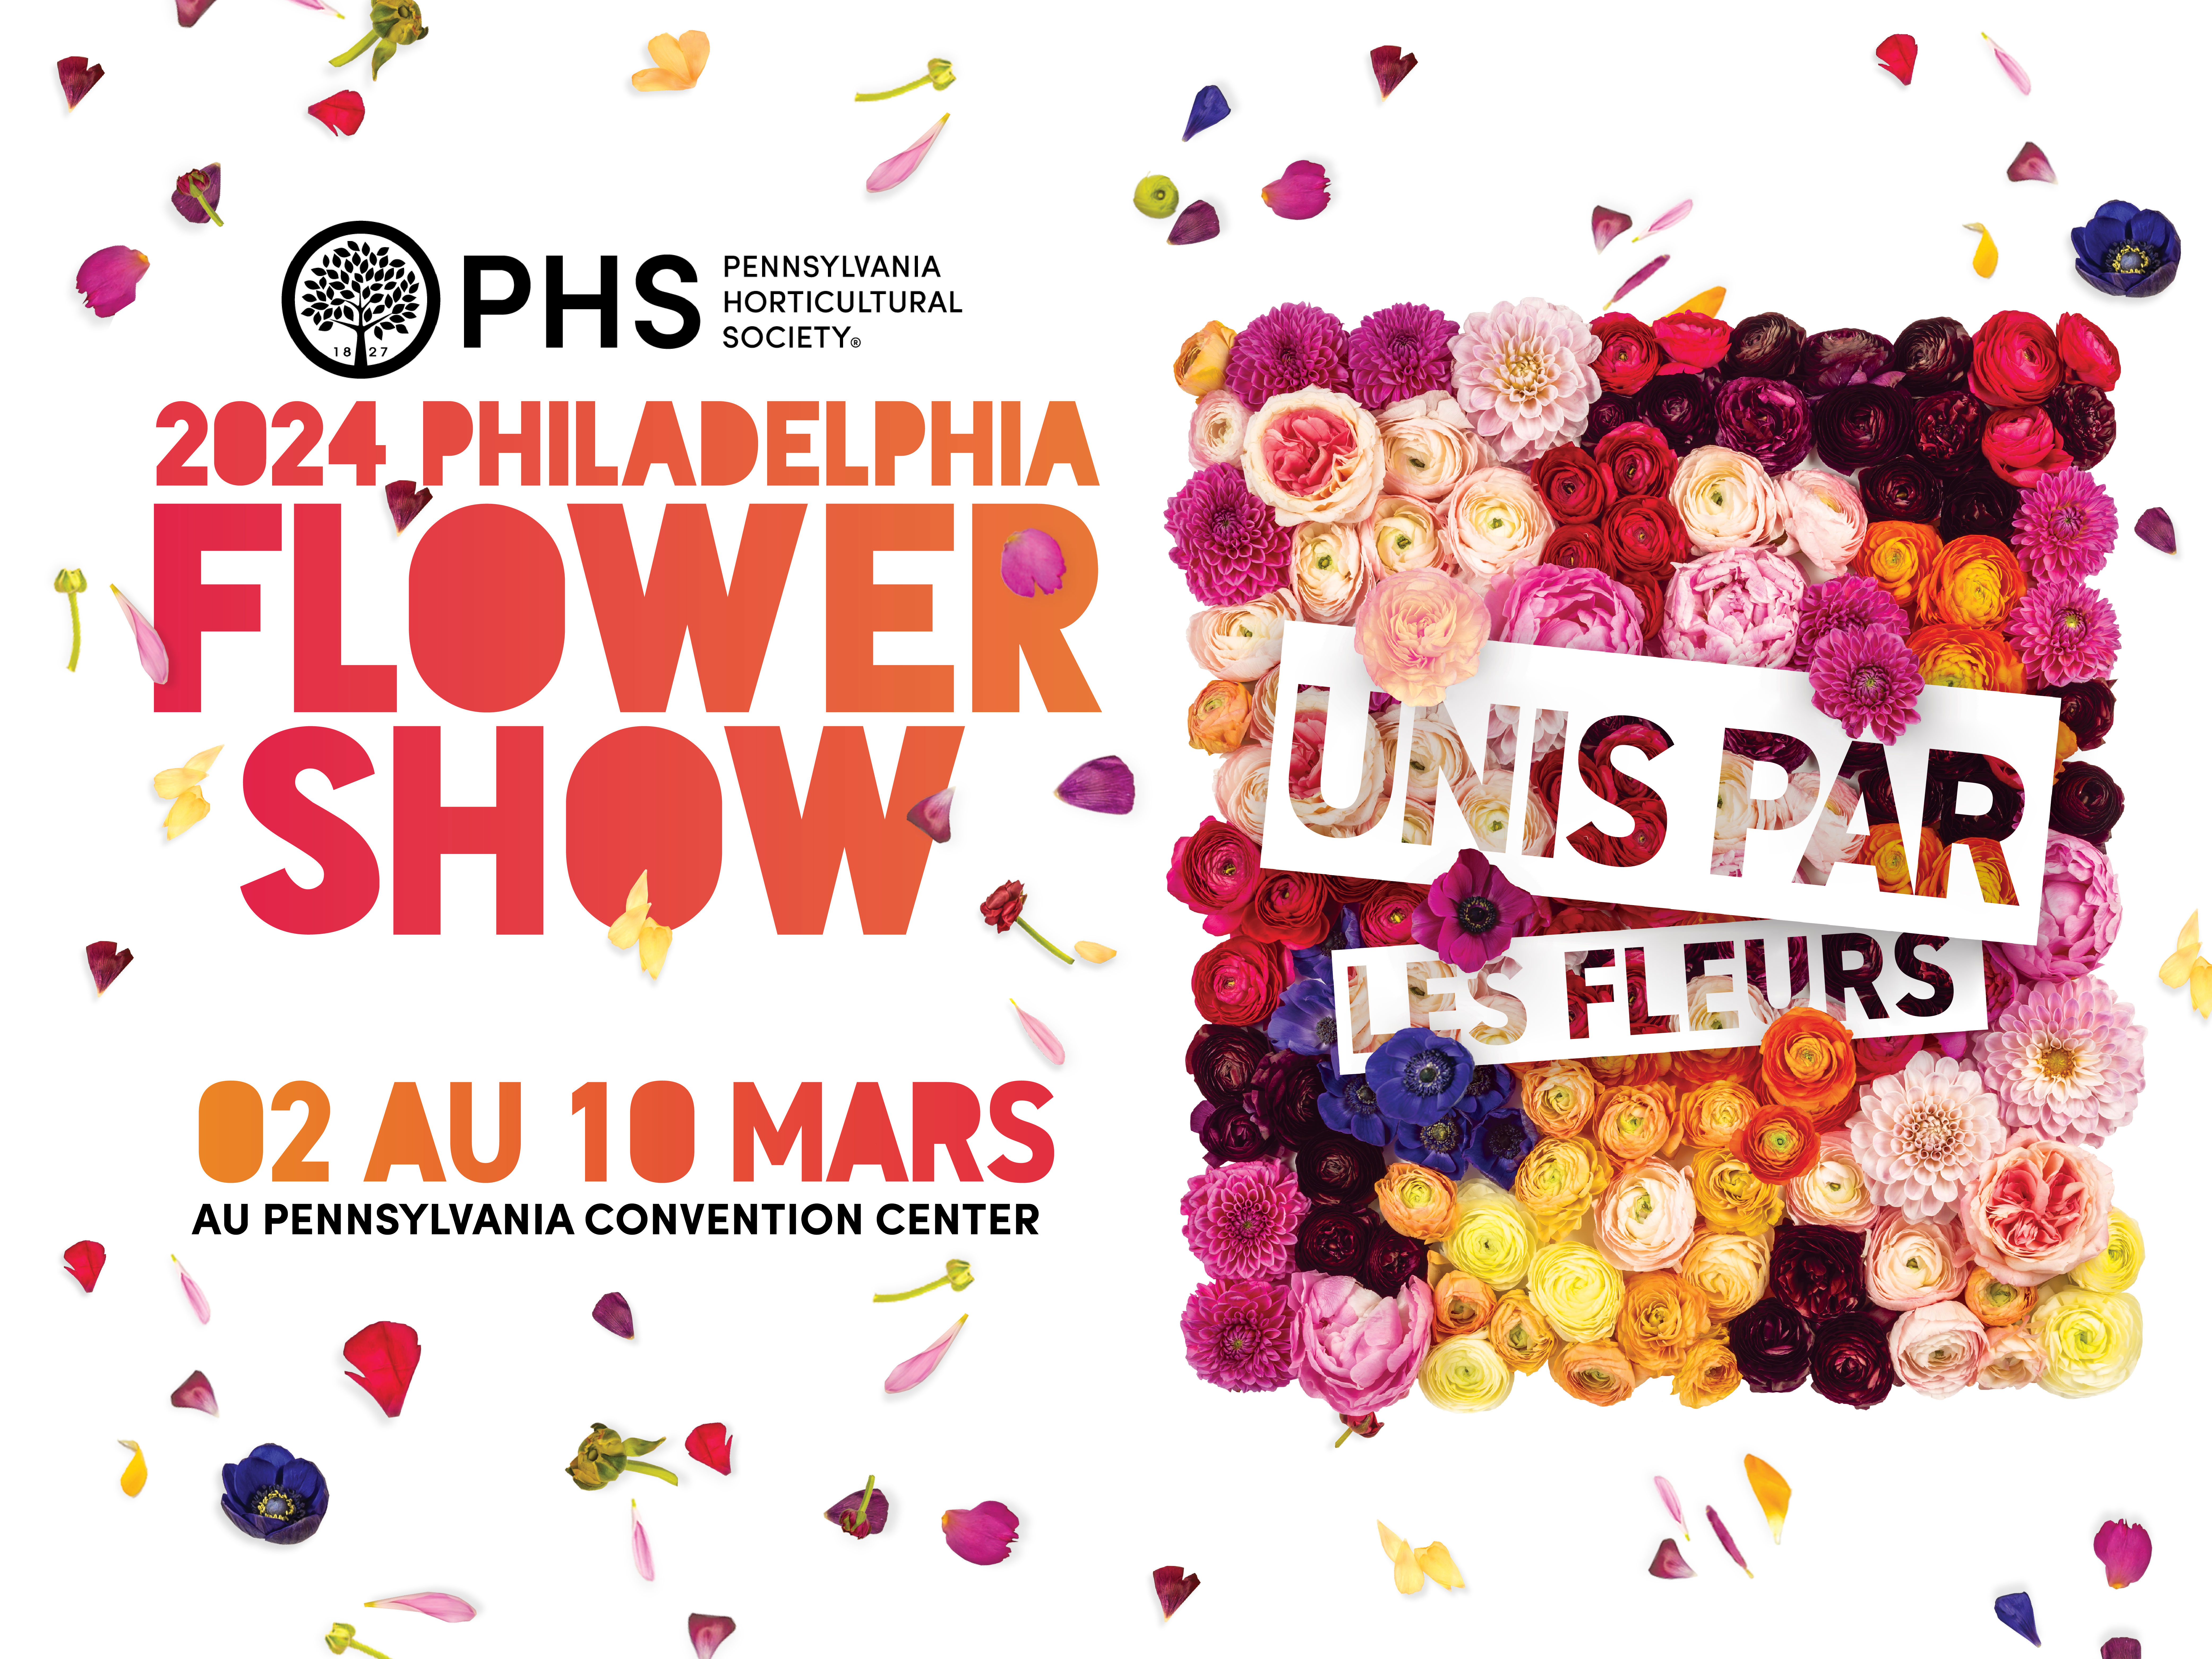 Promotion Pennsylvania Horticultural Society 2024 Philadelphia Flower Show Promotion United by Flowers – 02 au 10 mars